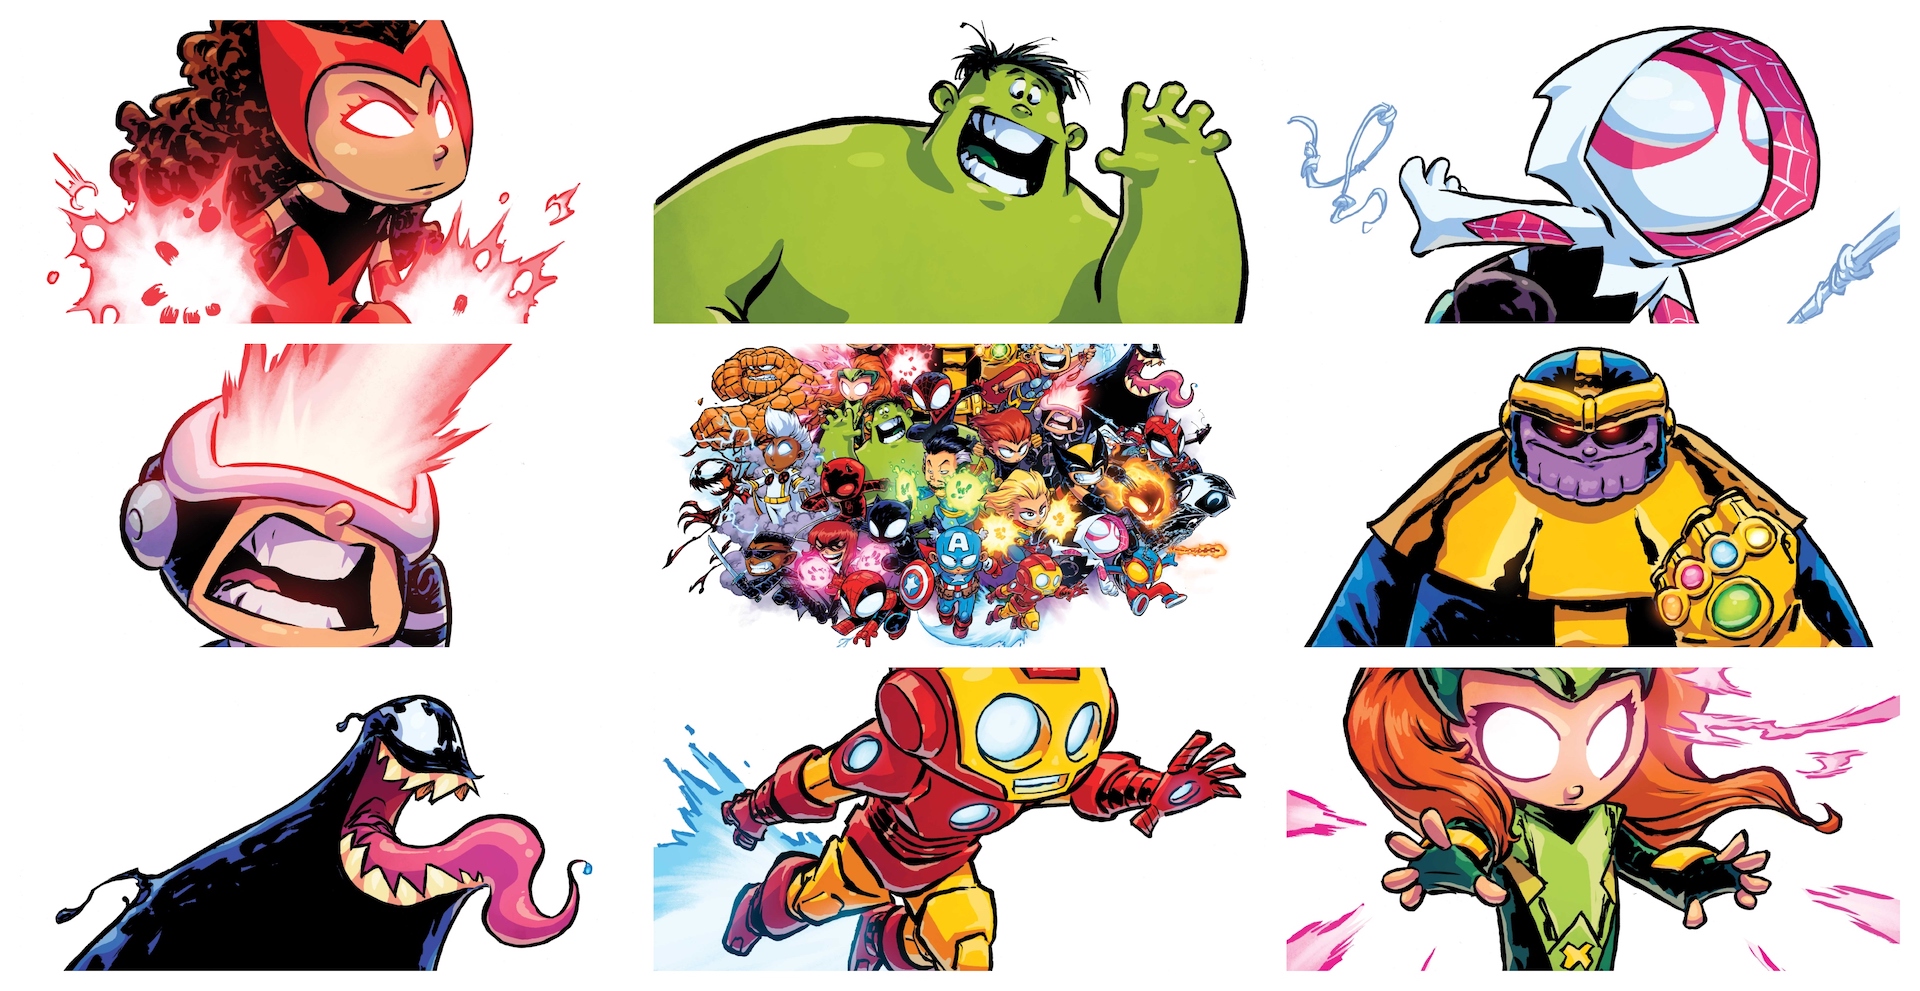 Marvel celebrates Skottie Young with 'Big Marvel' variant covers